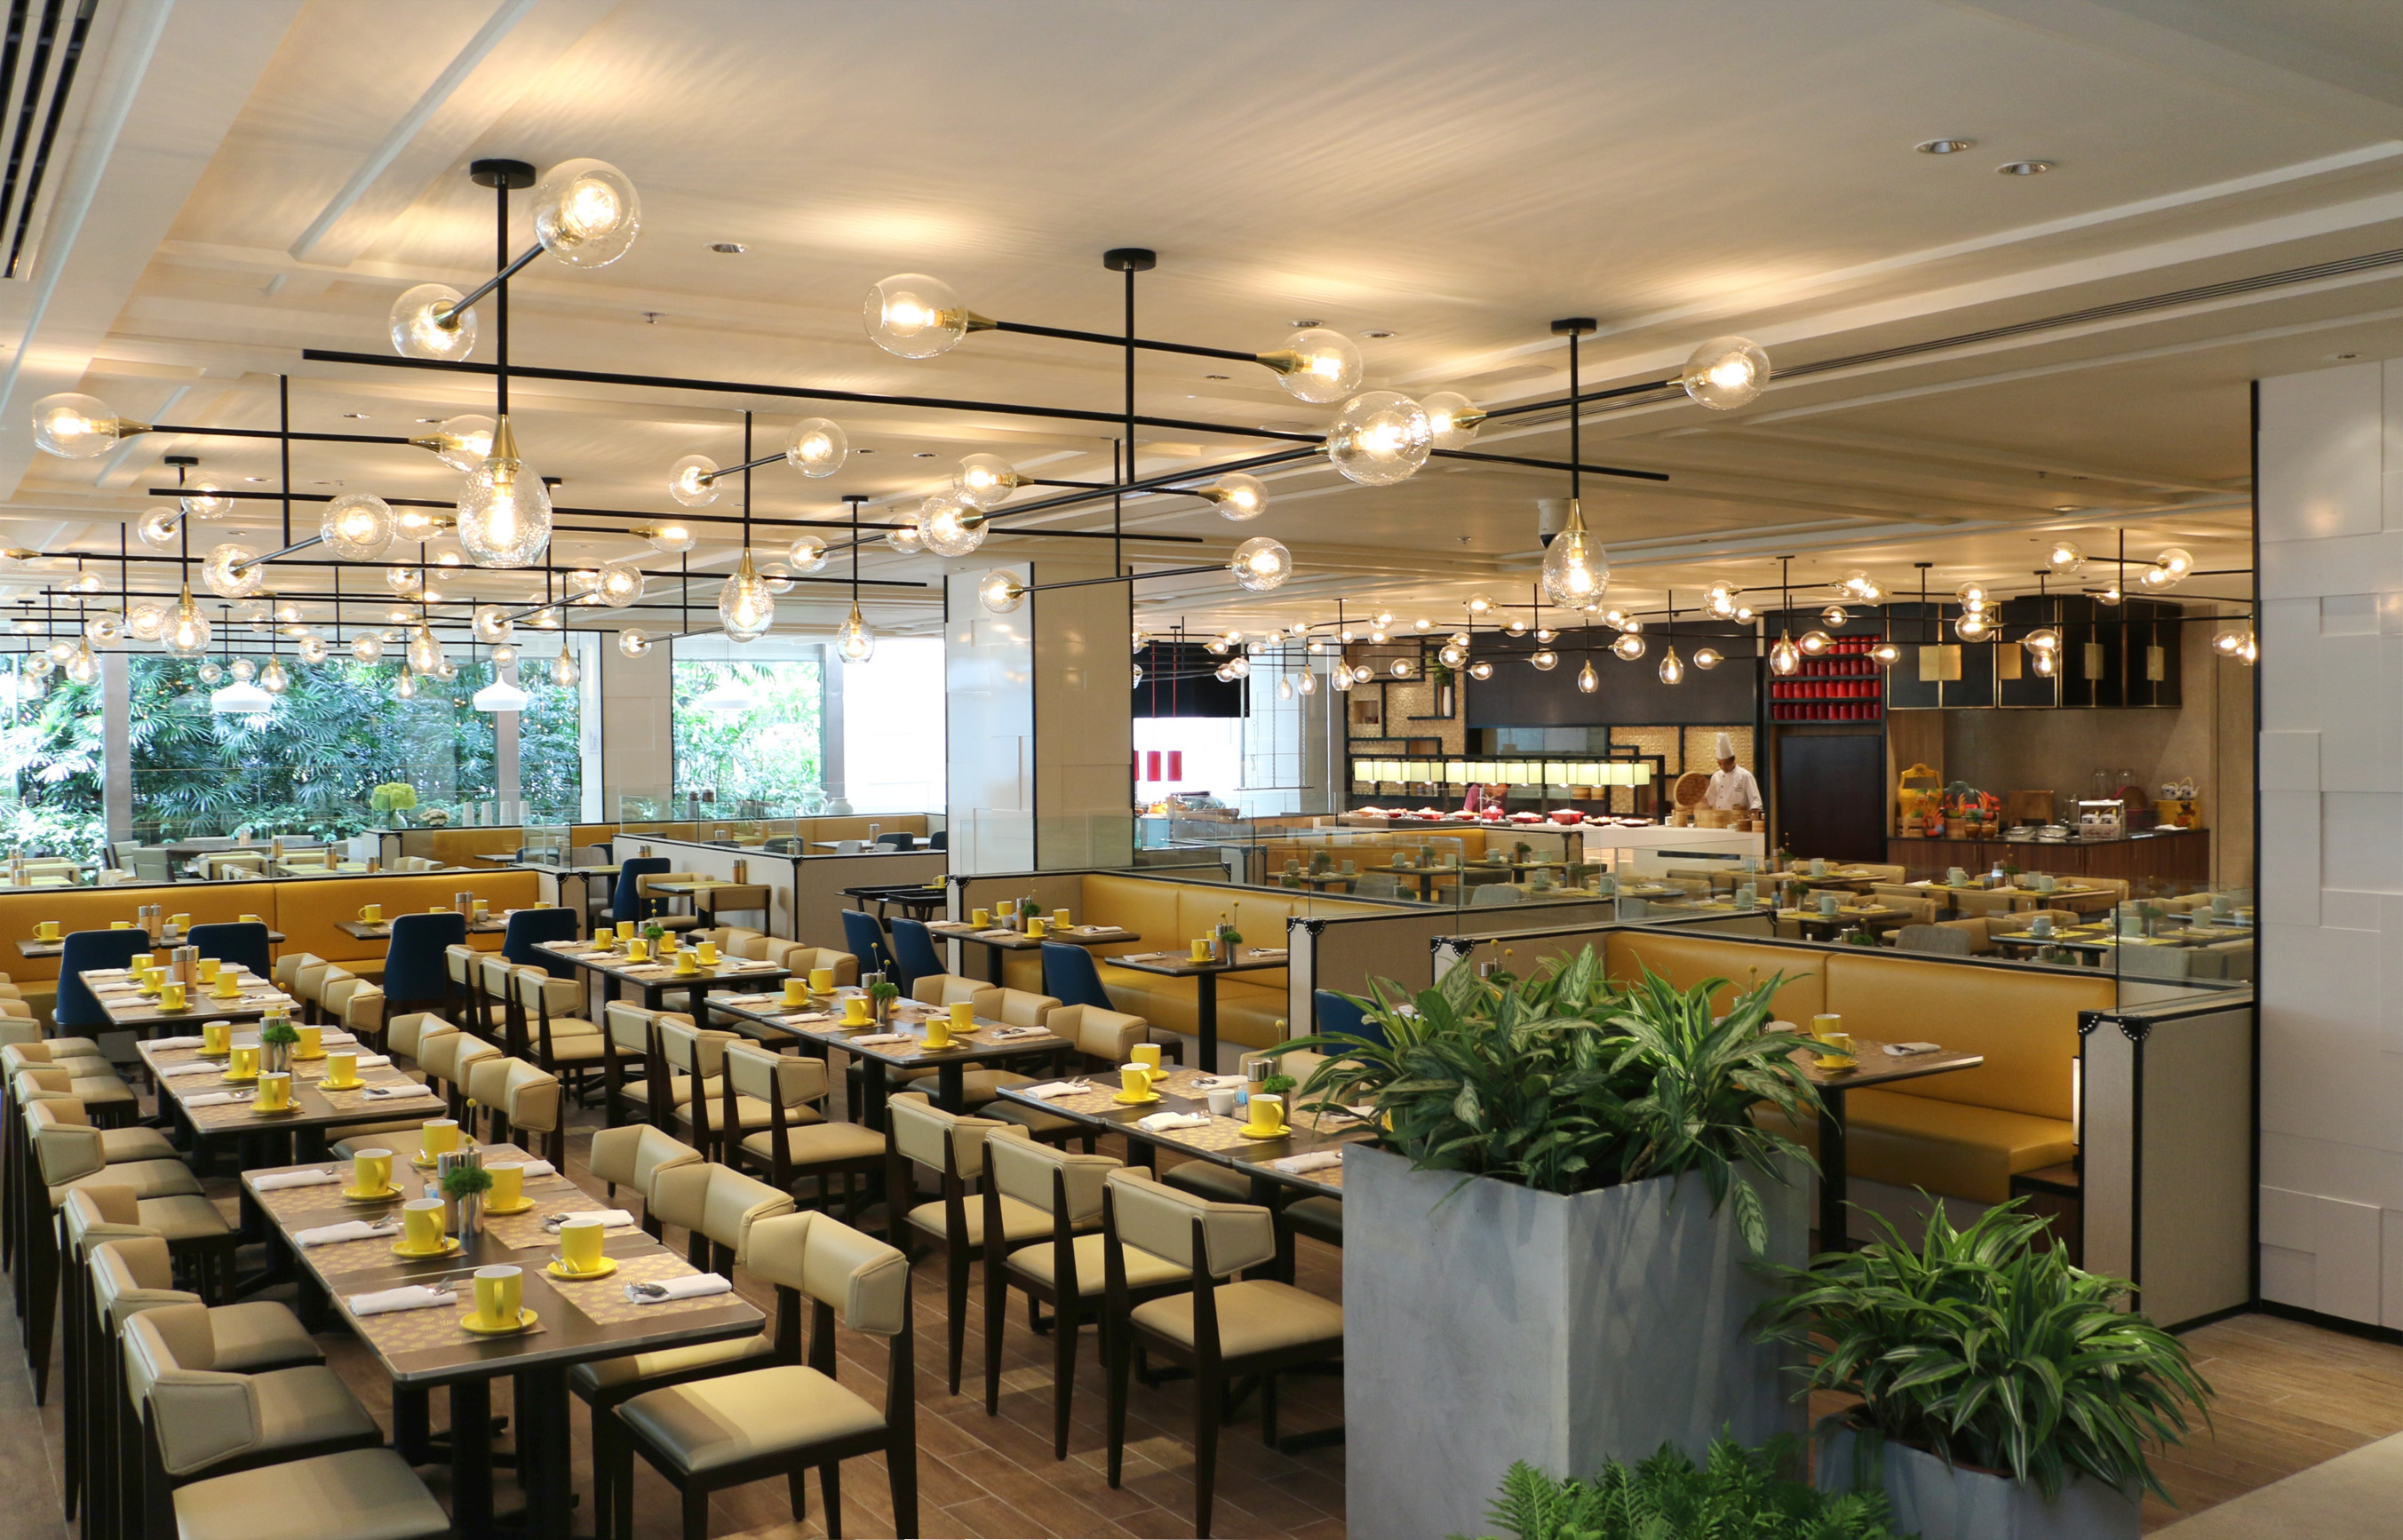 The warm and cosy ambience at Lemon Garden is ideal for great dining and celebratory sessions.